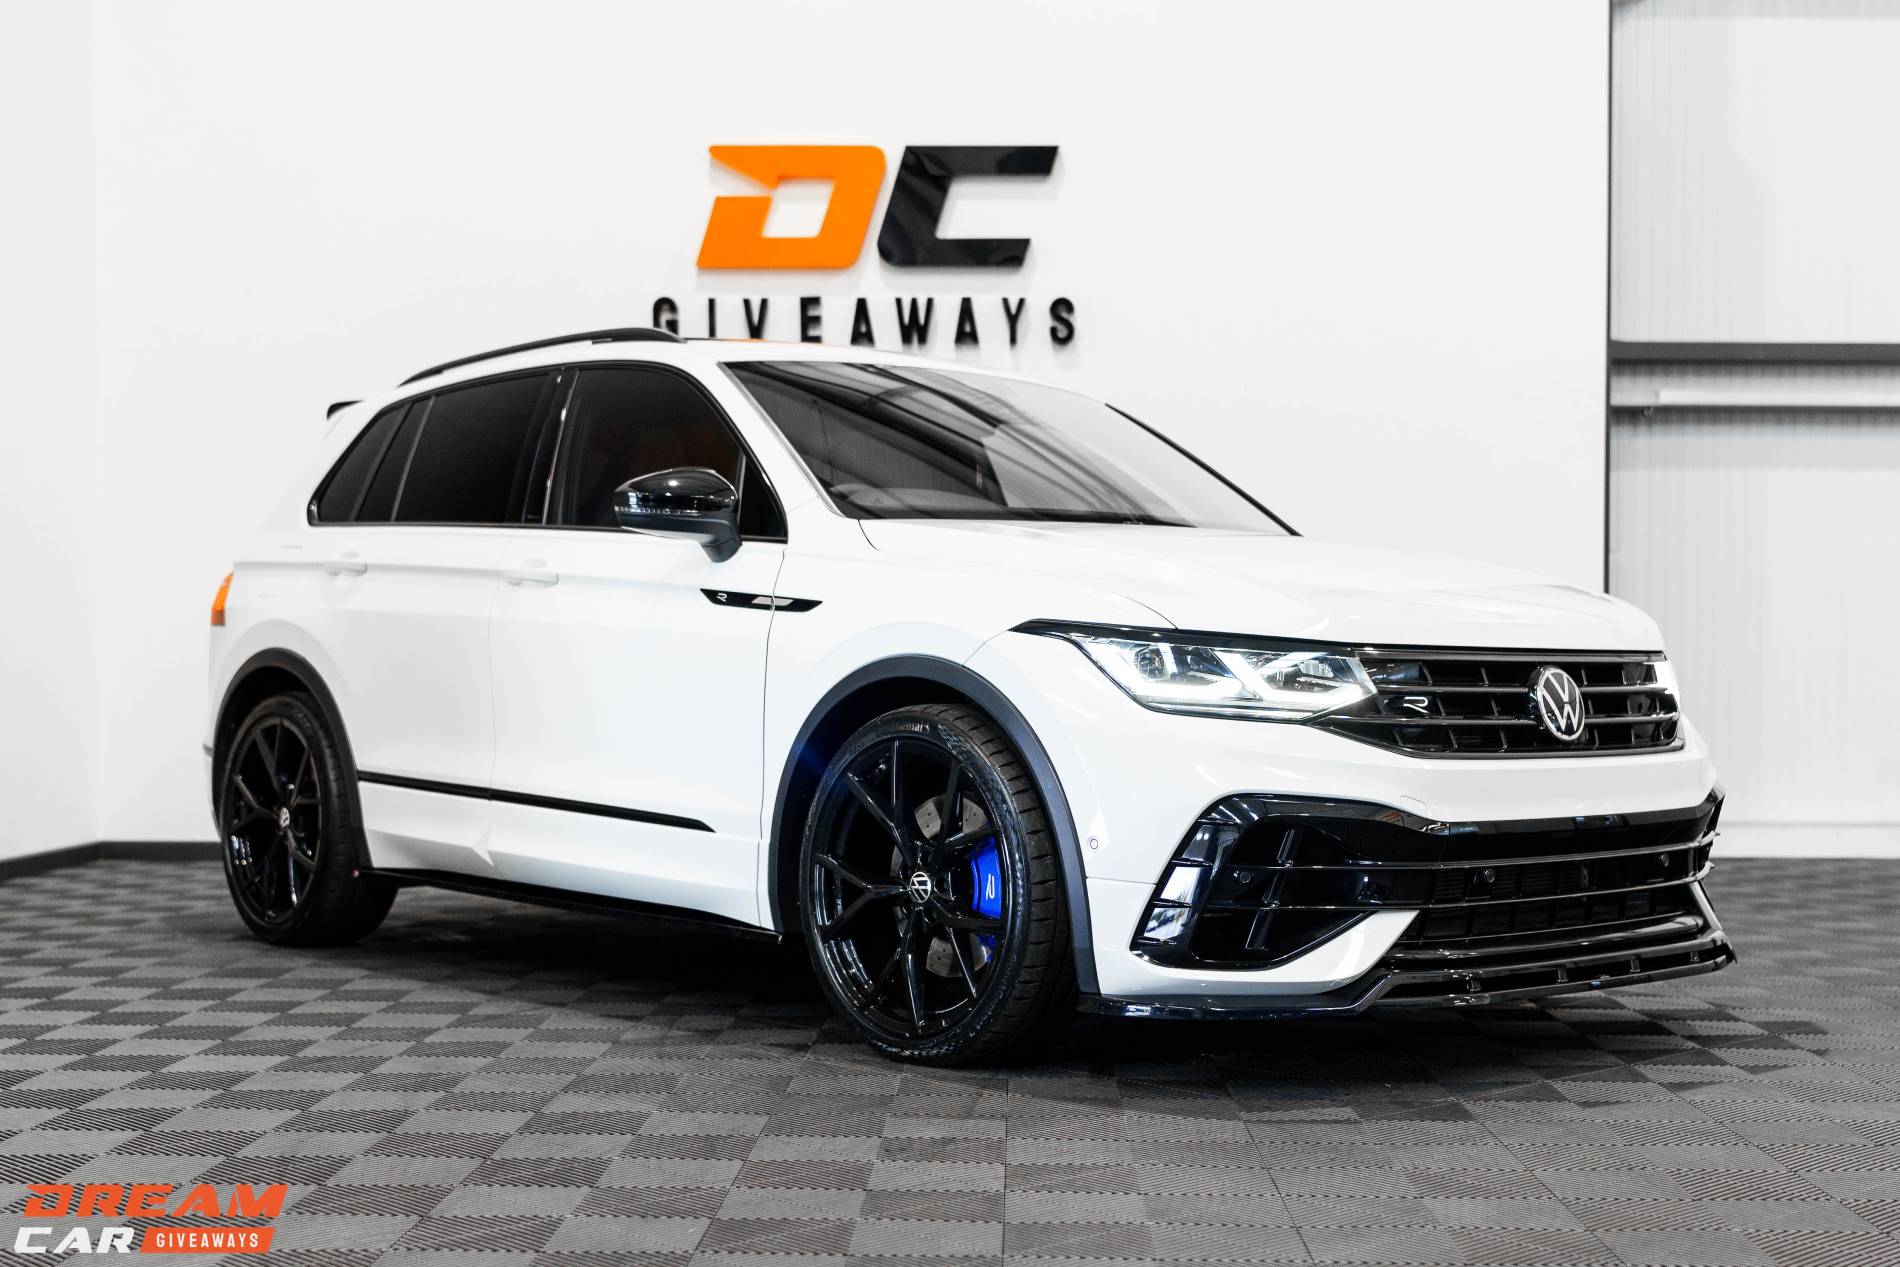 Win this 2021 Volkswagen Tiguan R & £2,000 or £32,000 Tax Free